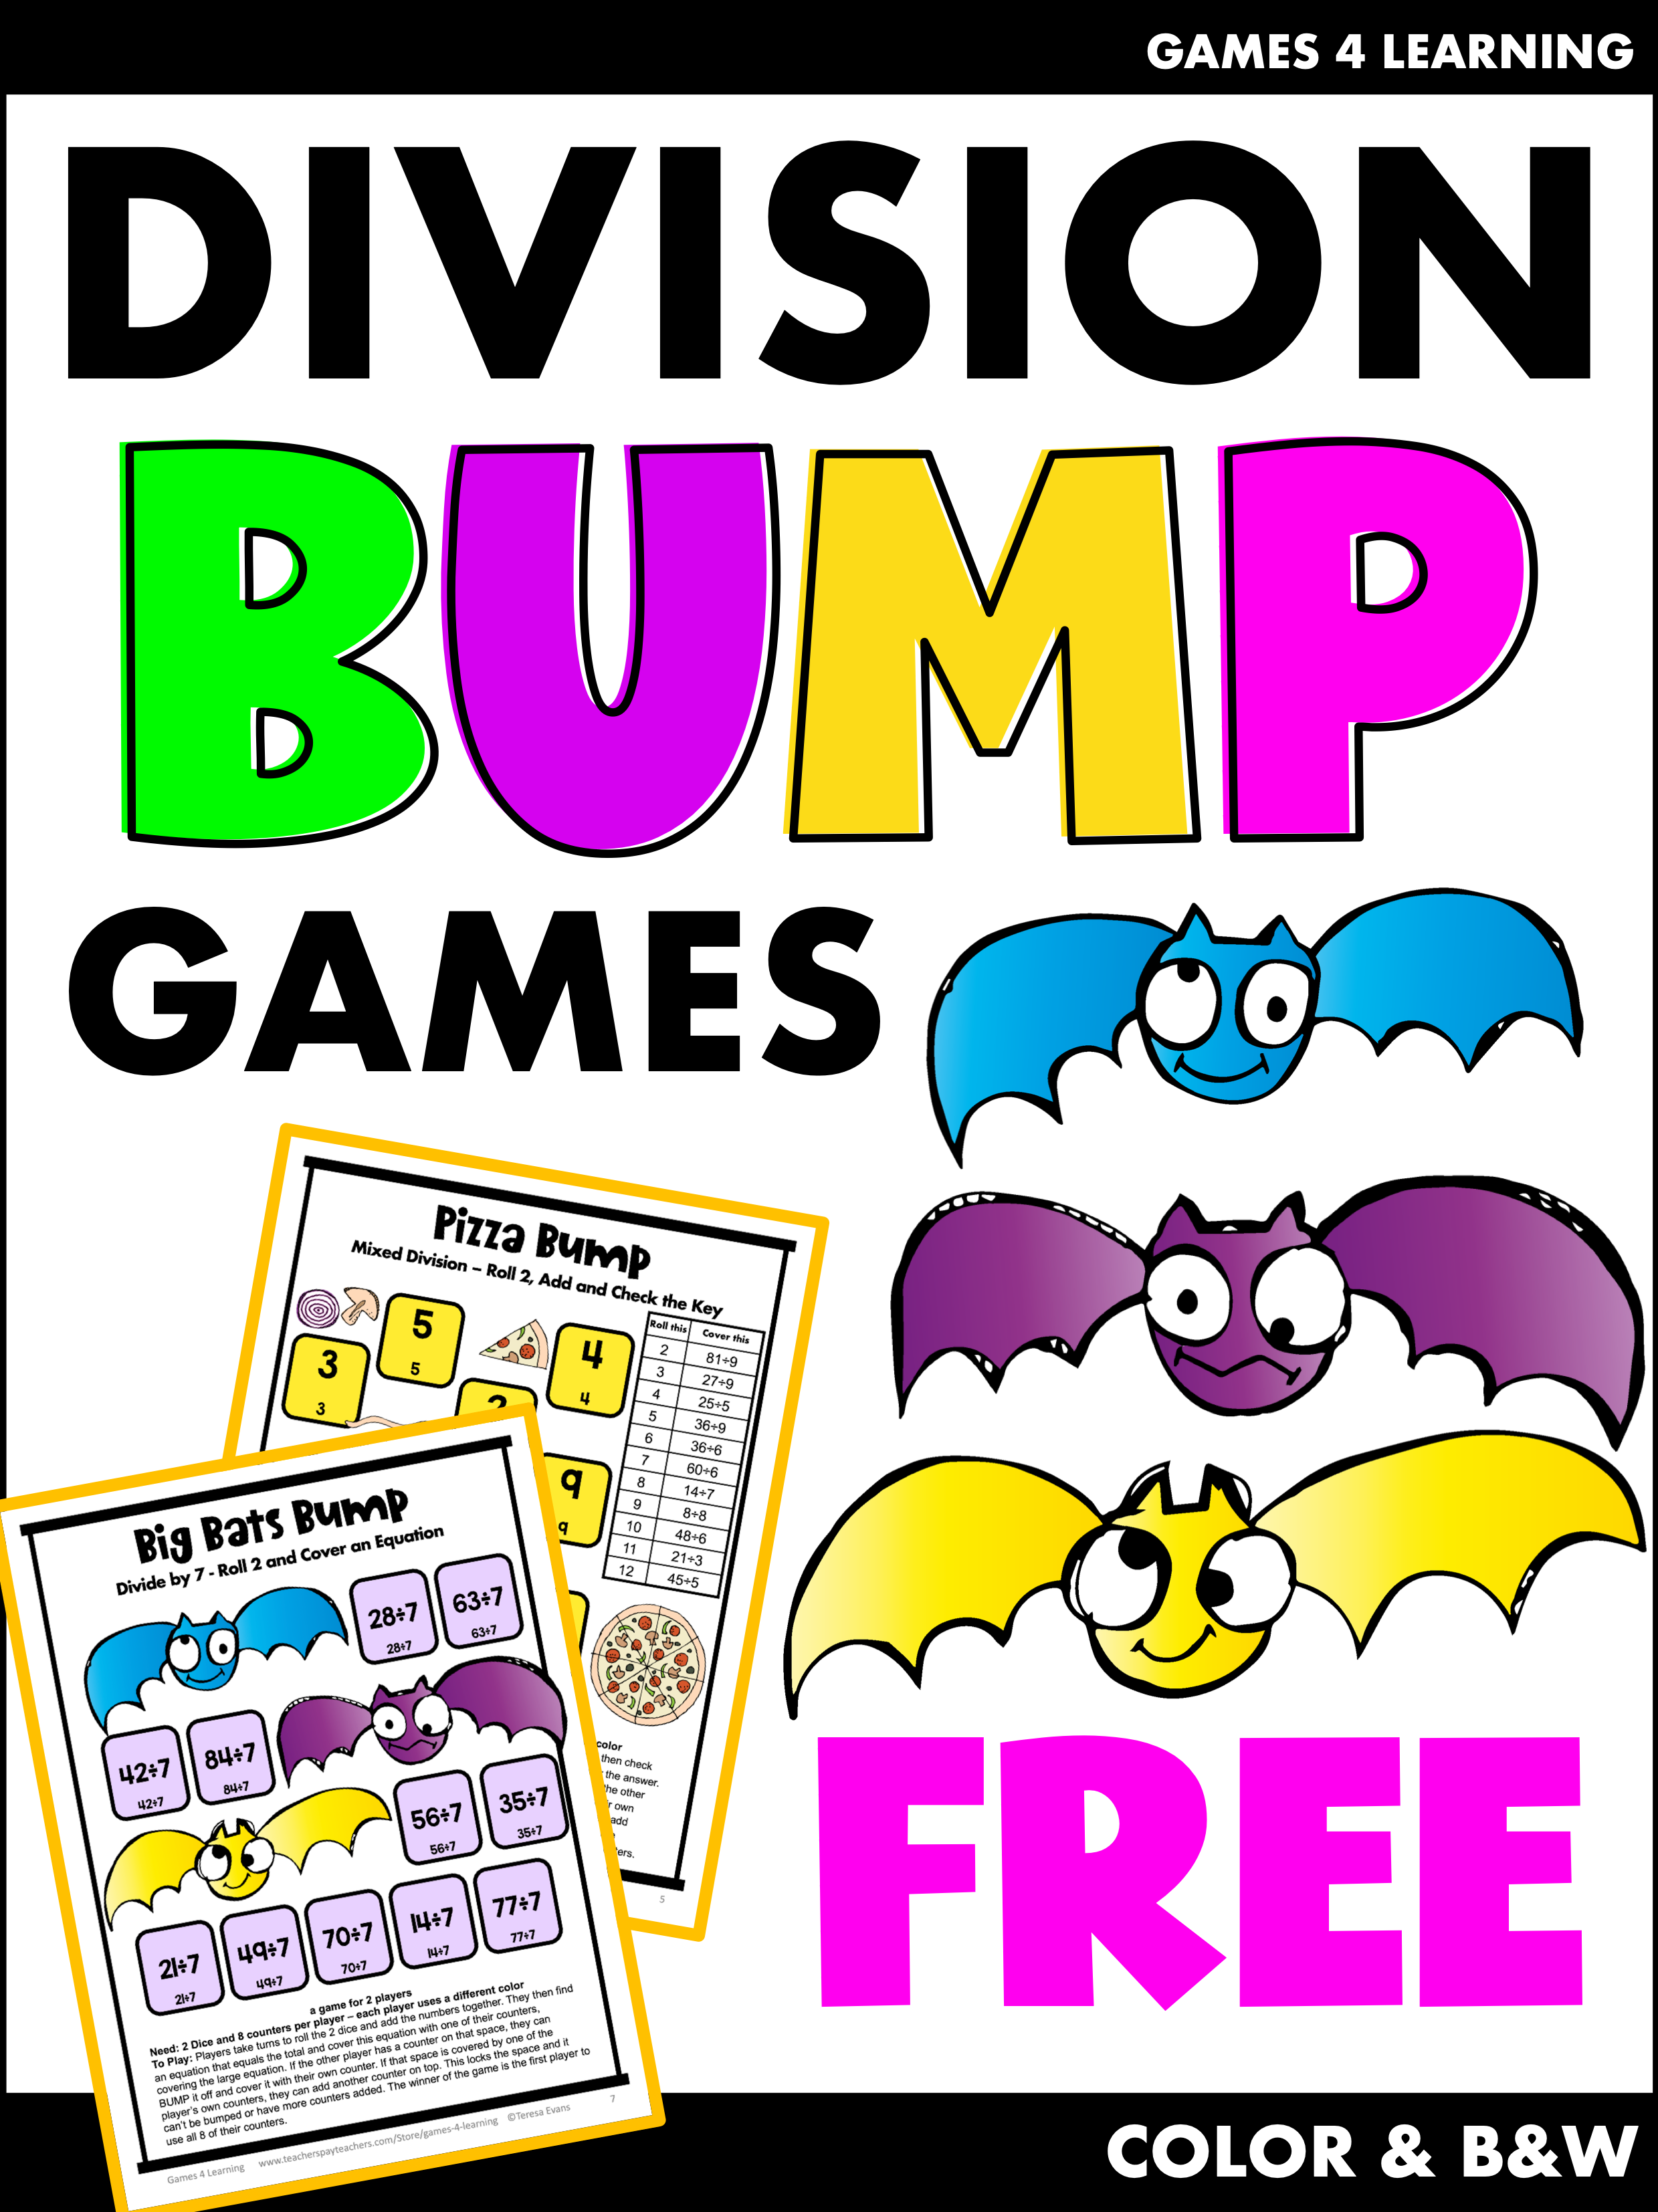 Free Division Bump Games - fun Math Games for Division facts practice